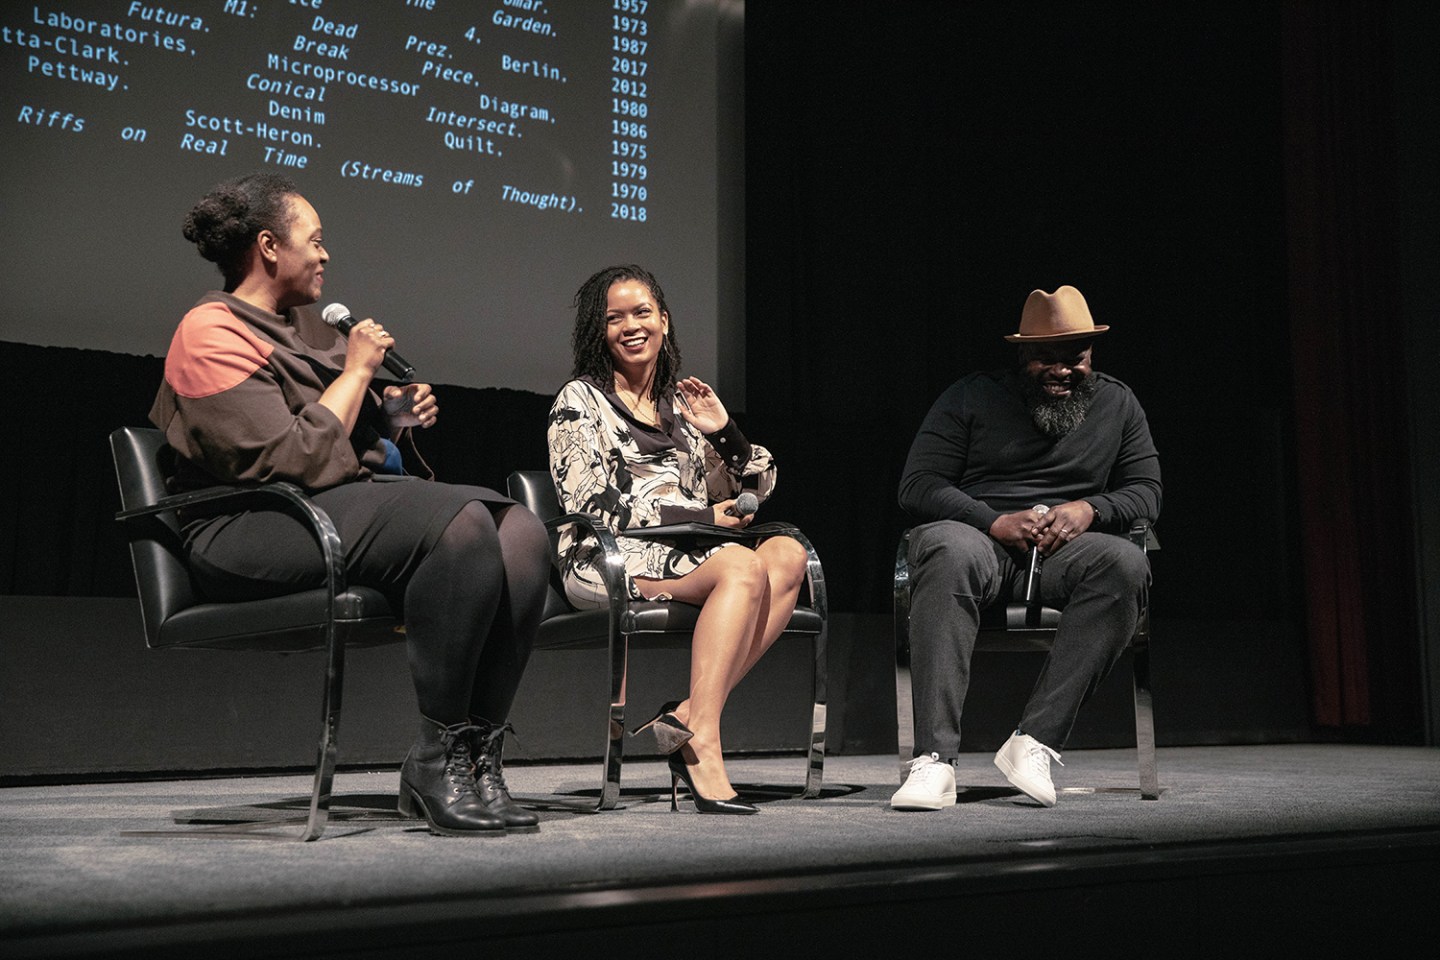 Jasmine Martin (center) moderates a conversation between artists Leslie Hewitt (left) and Black Thought (right) for The Museum of Modern Art, November 2018. Image by Artmurri